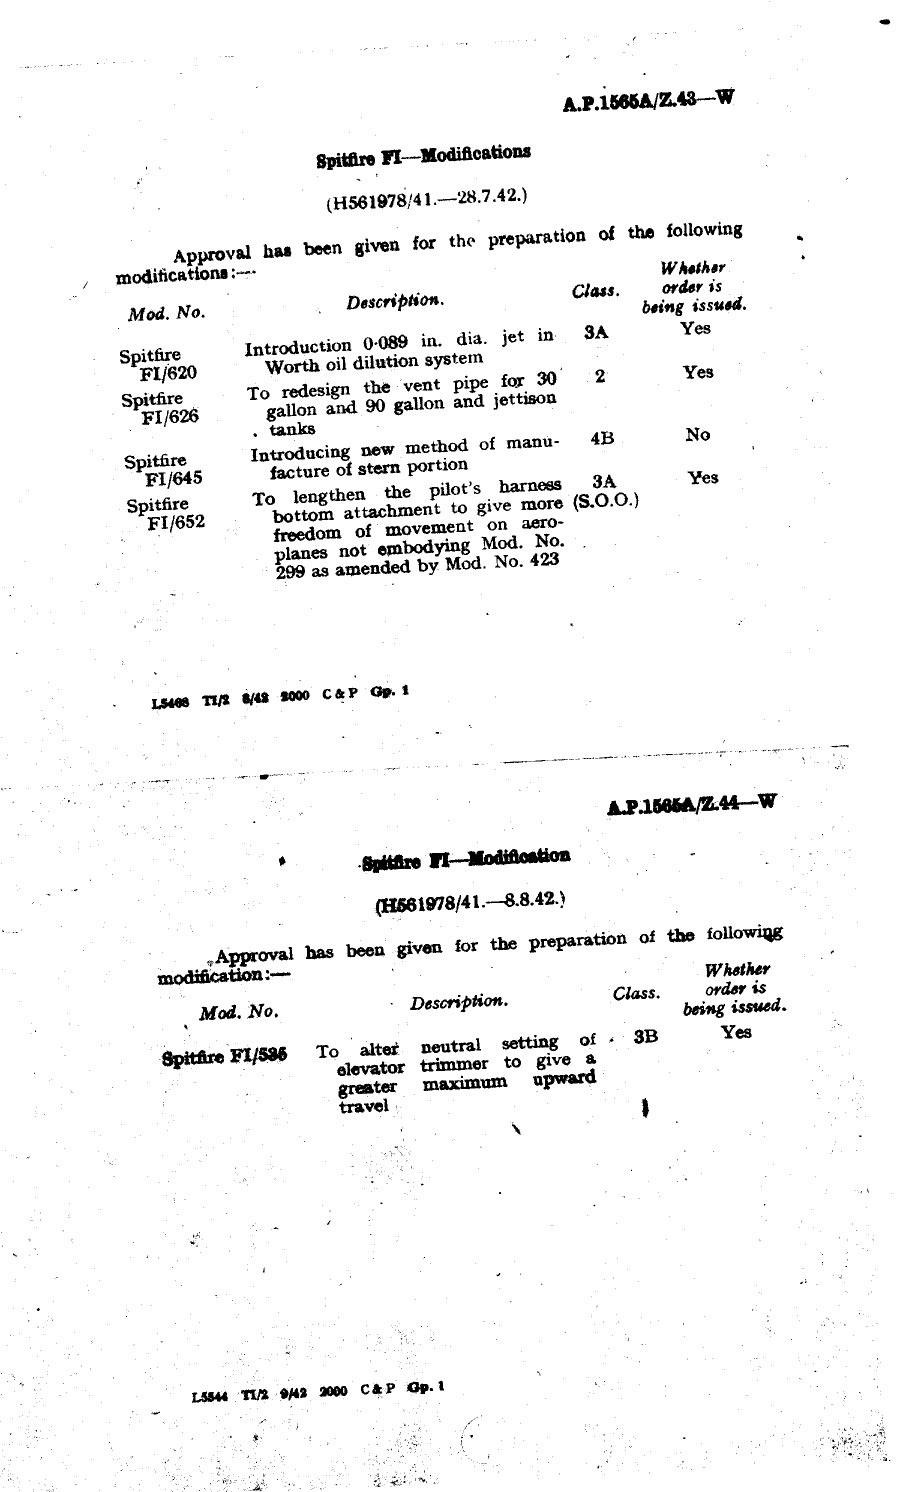 Sample page 1 from AirCorps Library document: Spitfire F.I Modifications 620, 626, 645, and 652